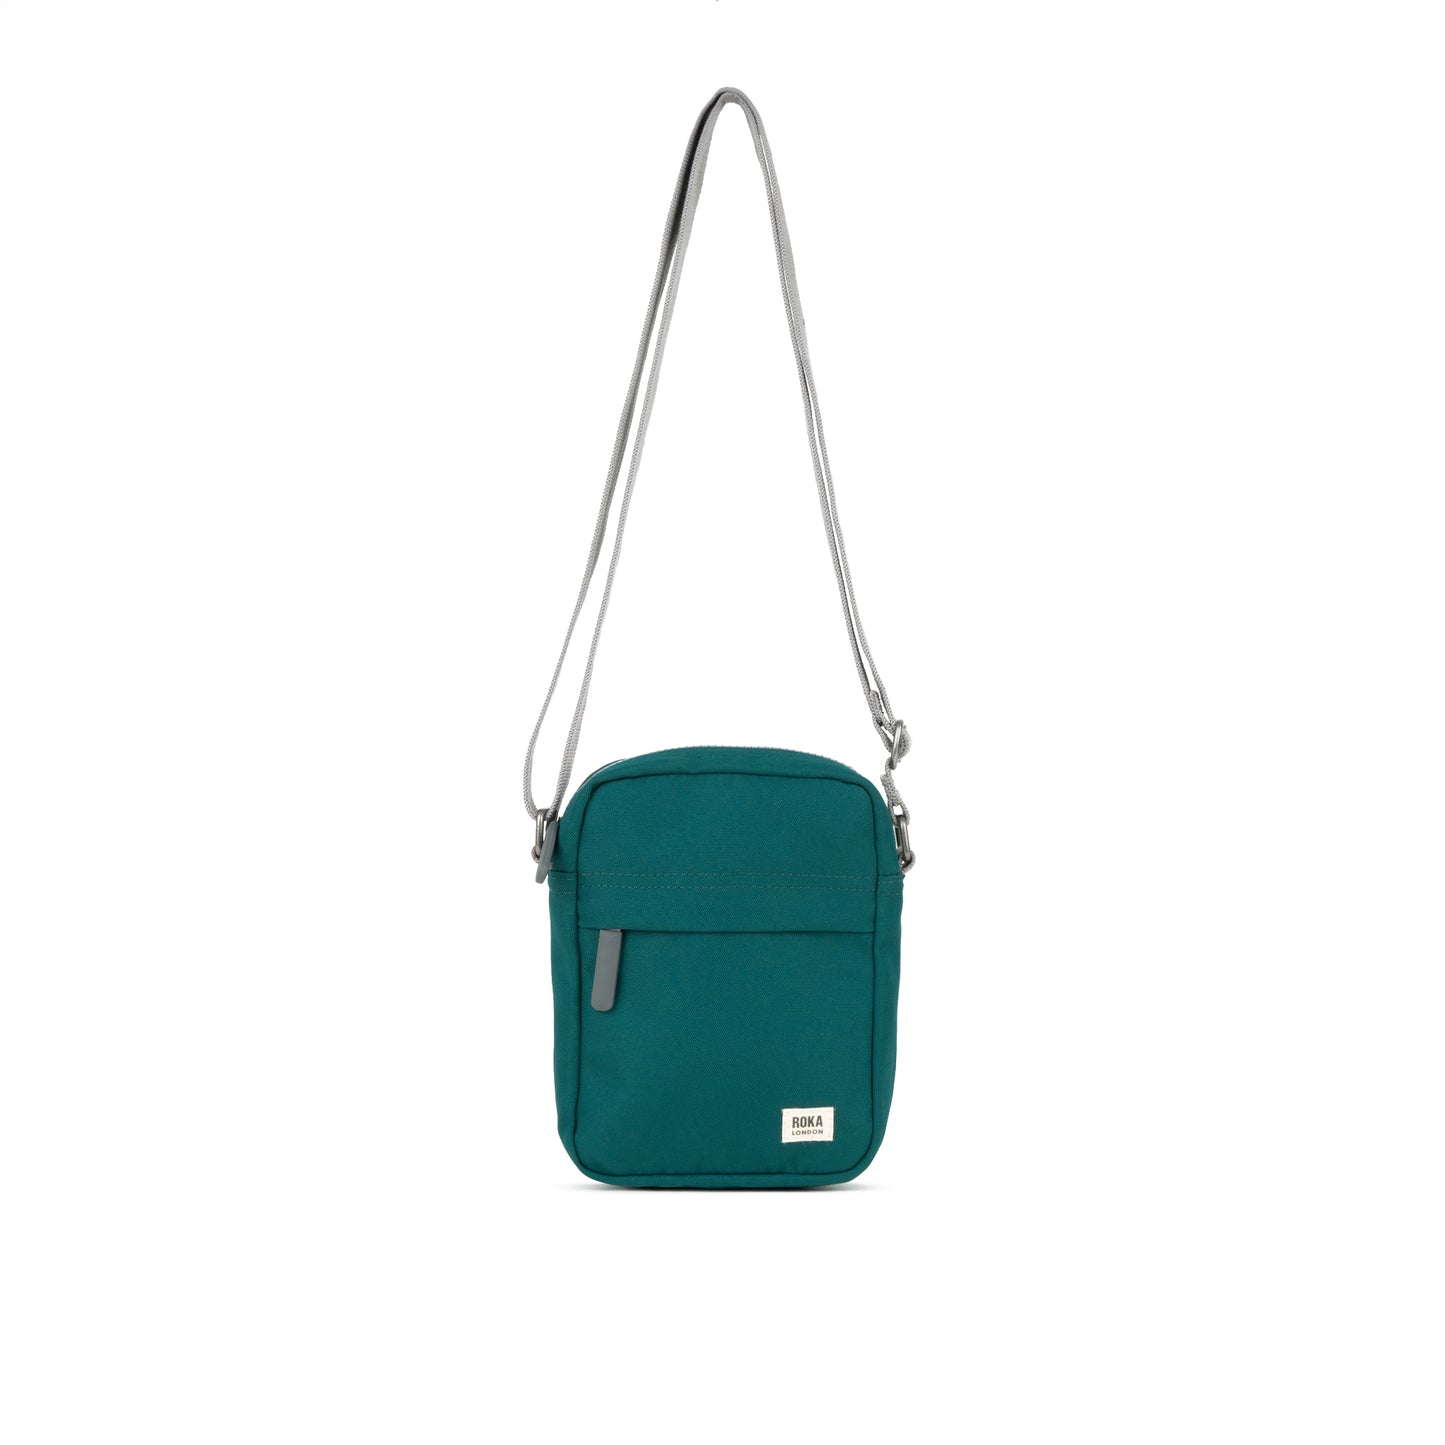 Conker Boutique Roka Bond Sustainable Bag in Teal